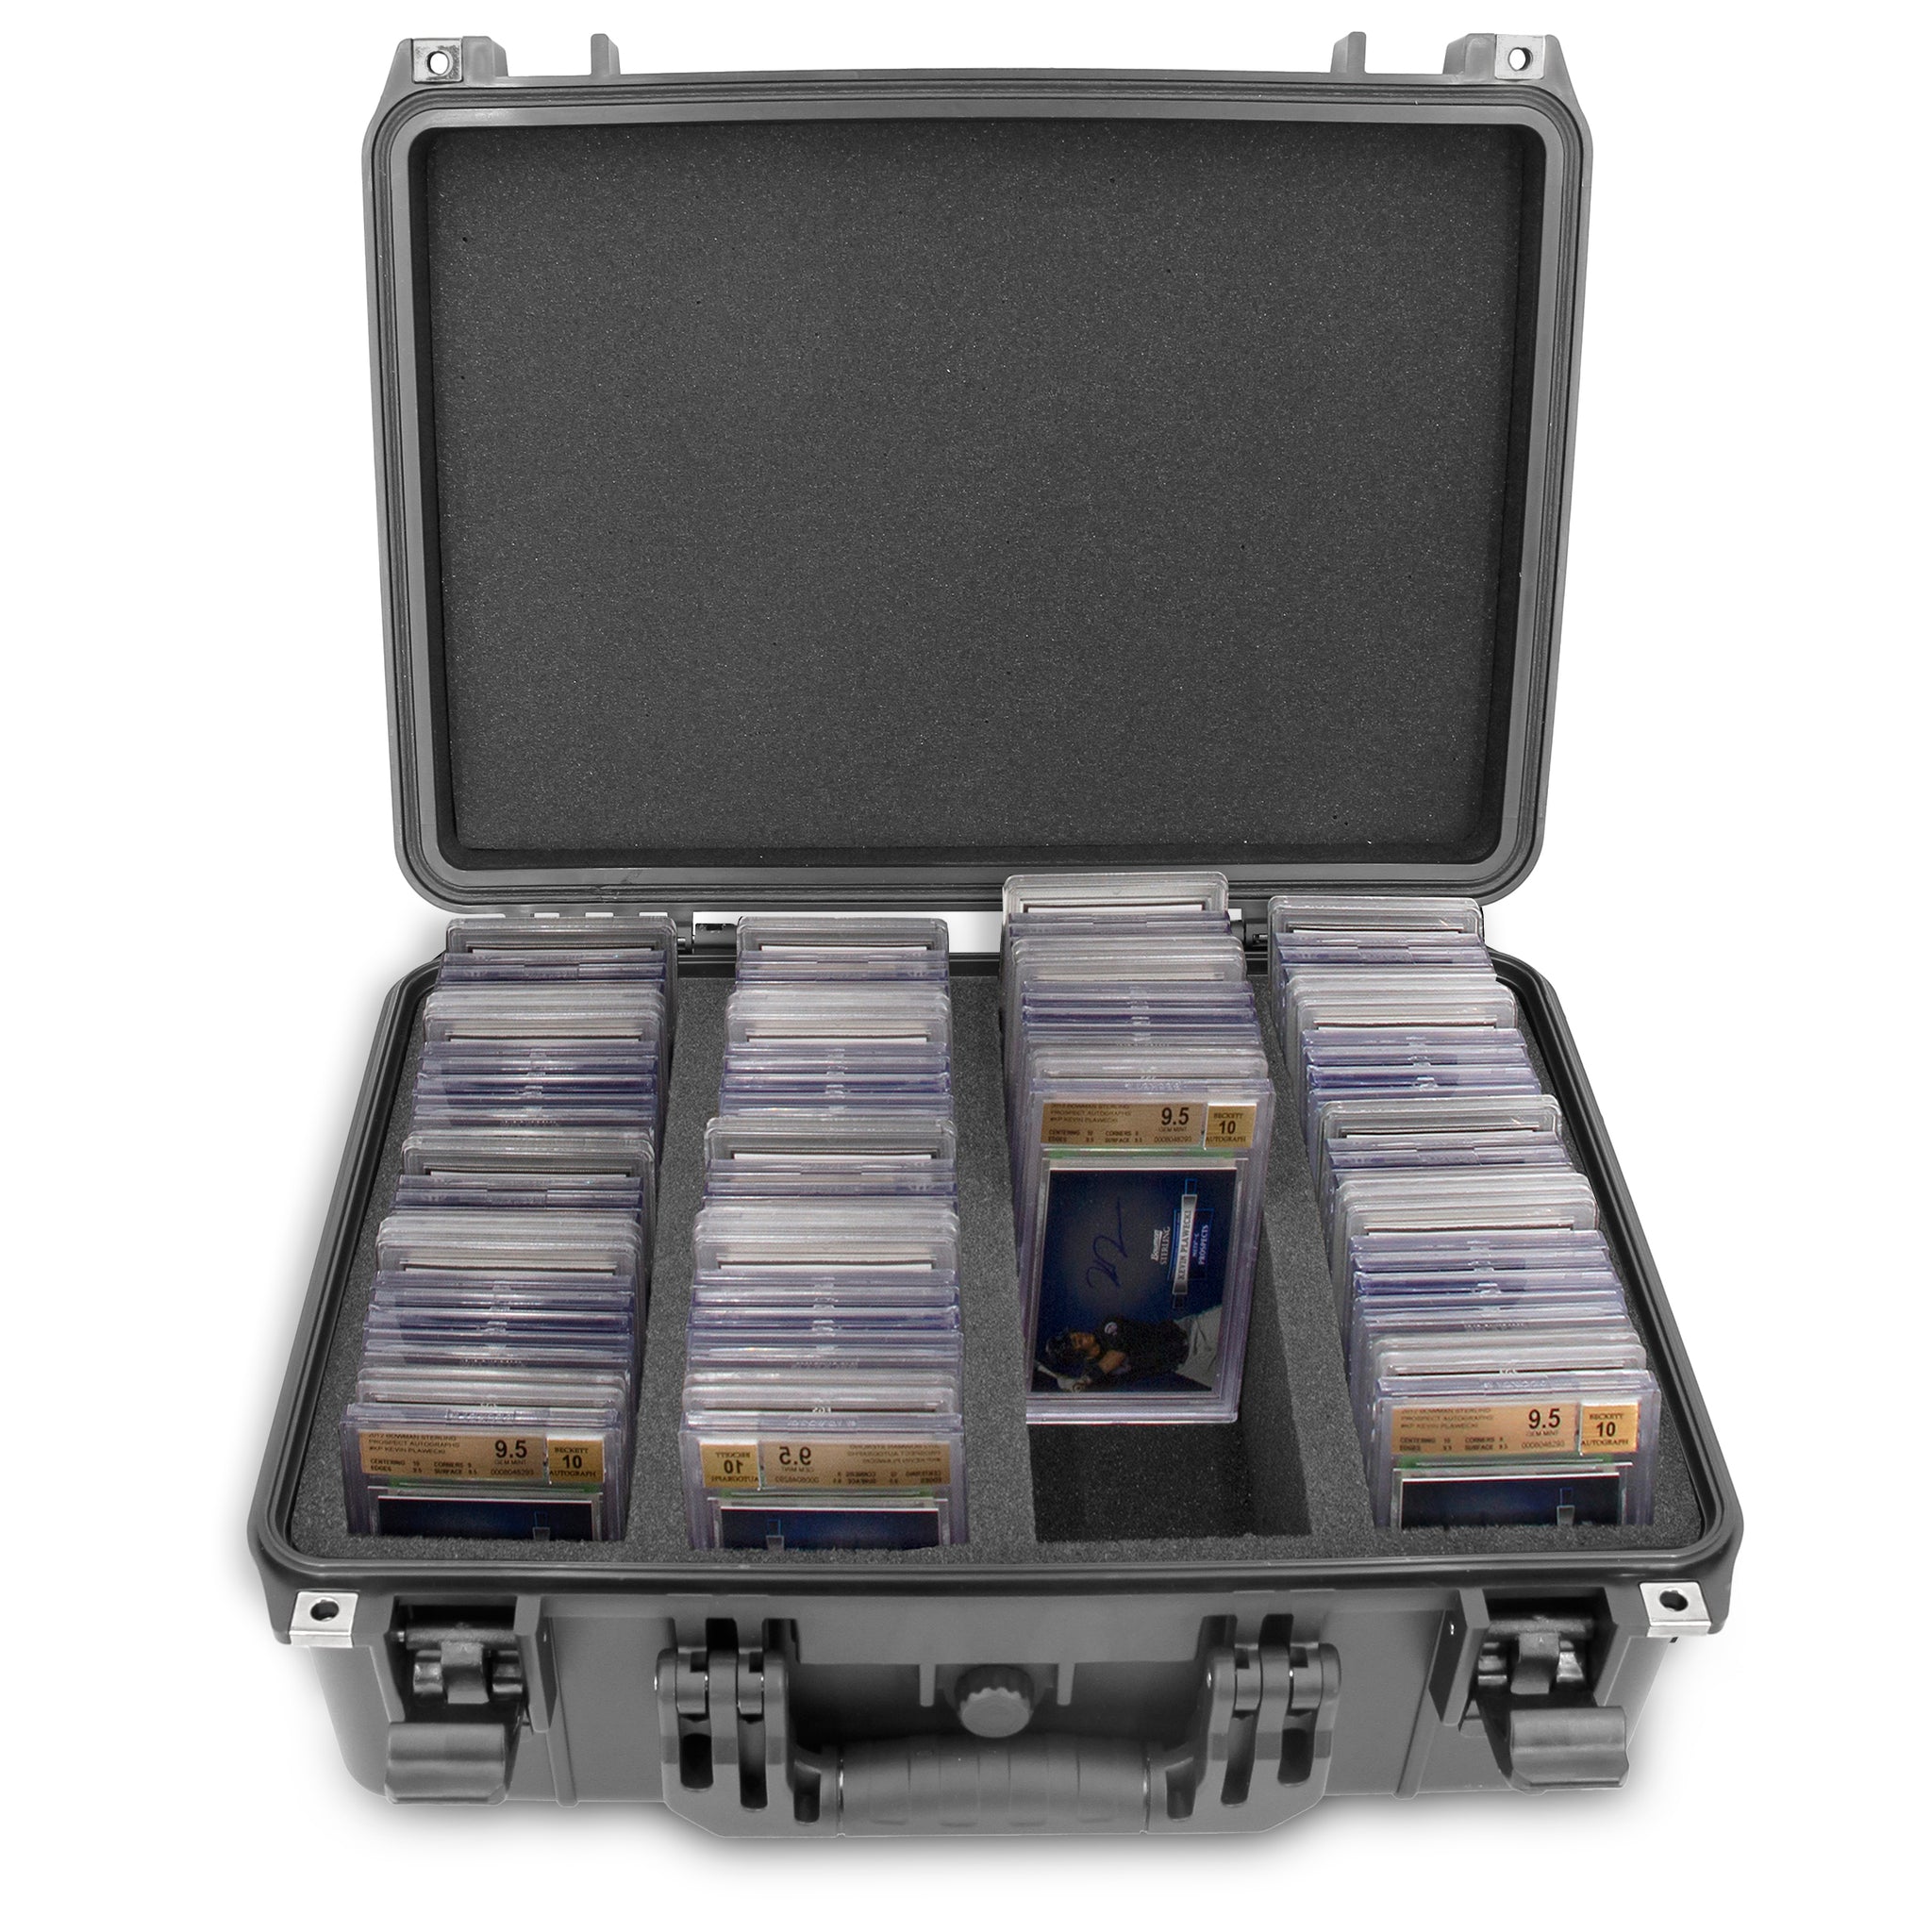 CASEMATIX Graded Card Case Compatible with 90+ BGS PSA FGS Graded